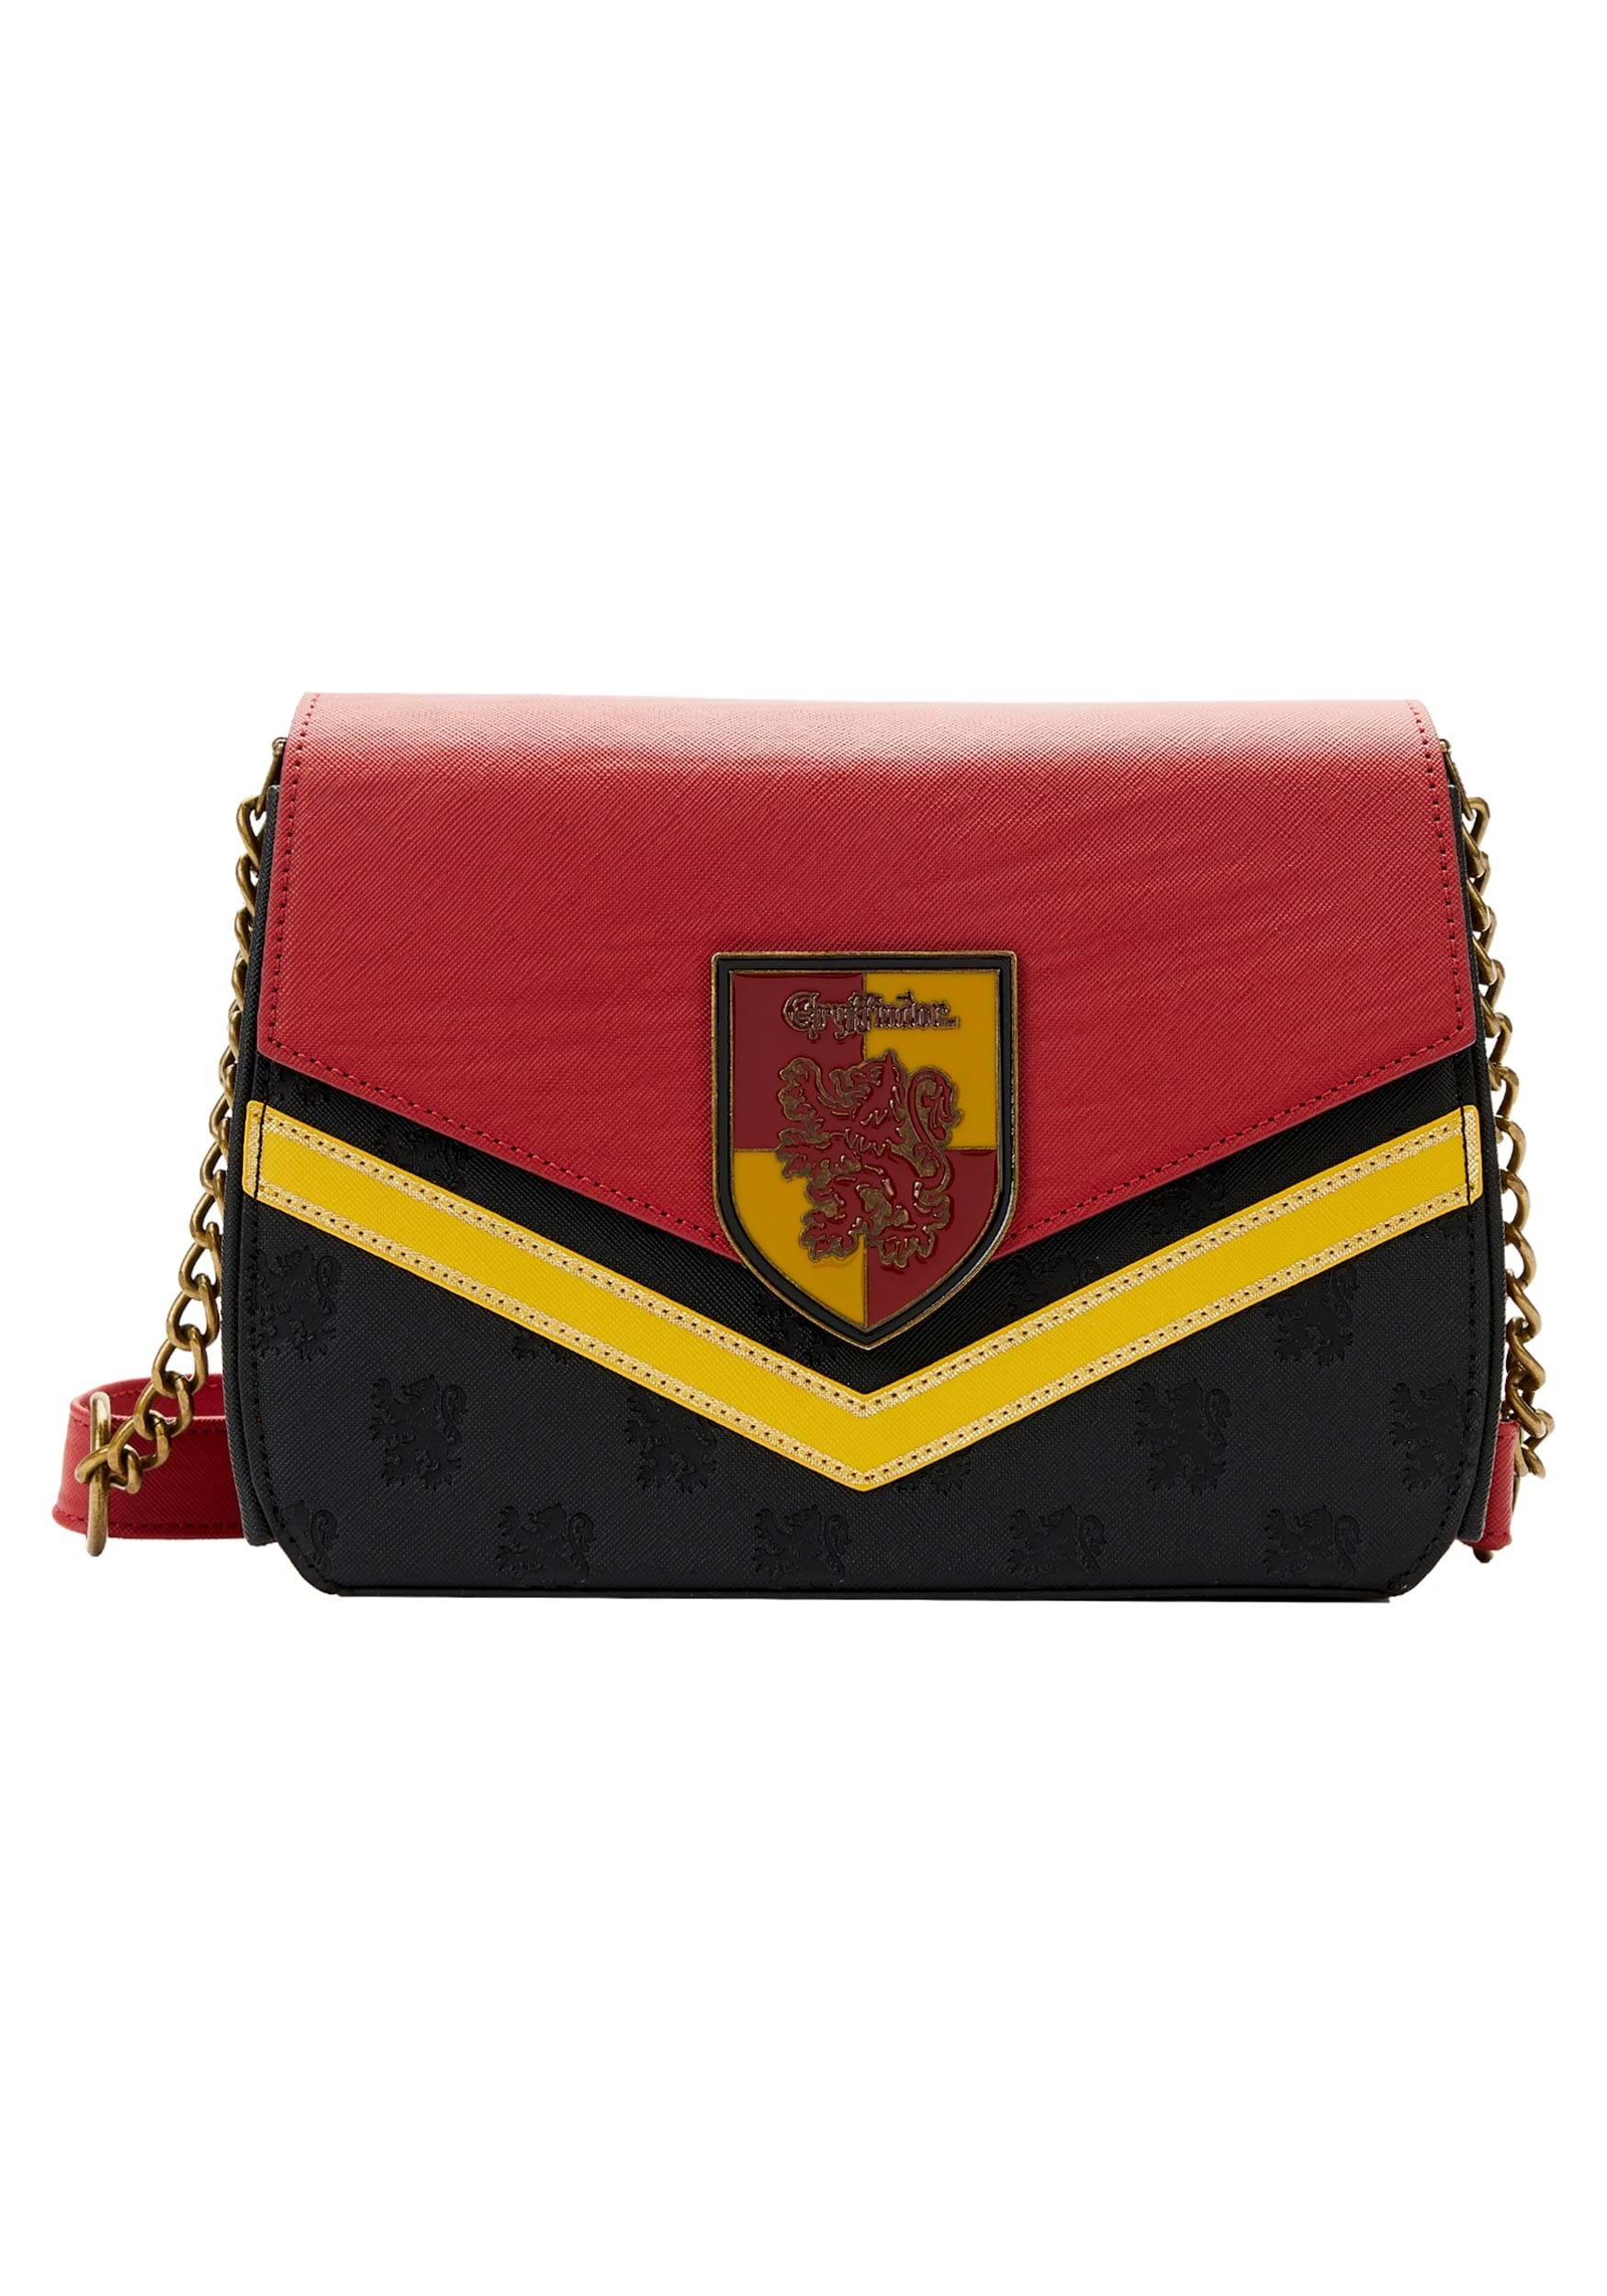 Harry Potter Gryffindor Chain Strap Loungefly Crossbody Bag